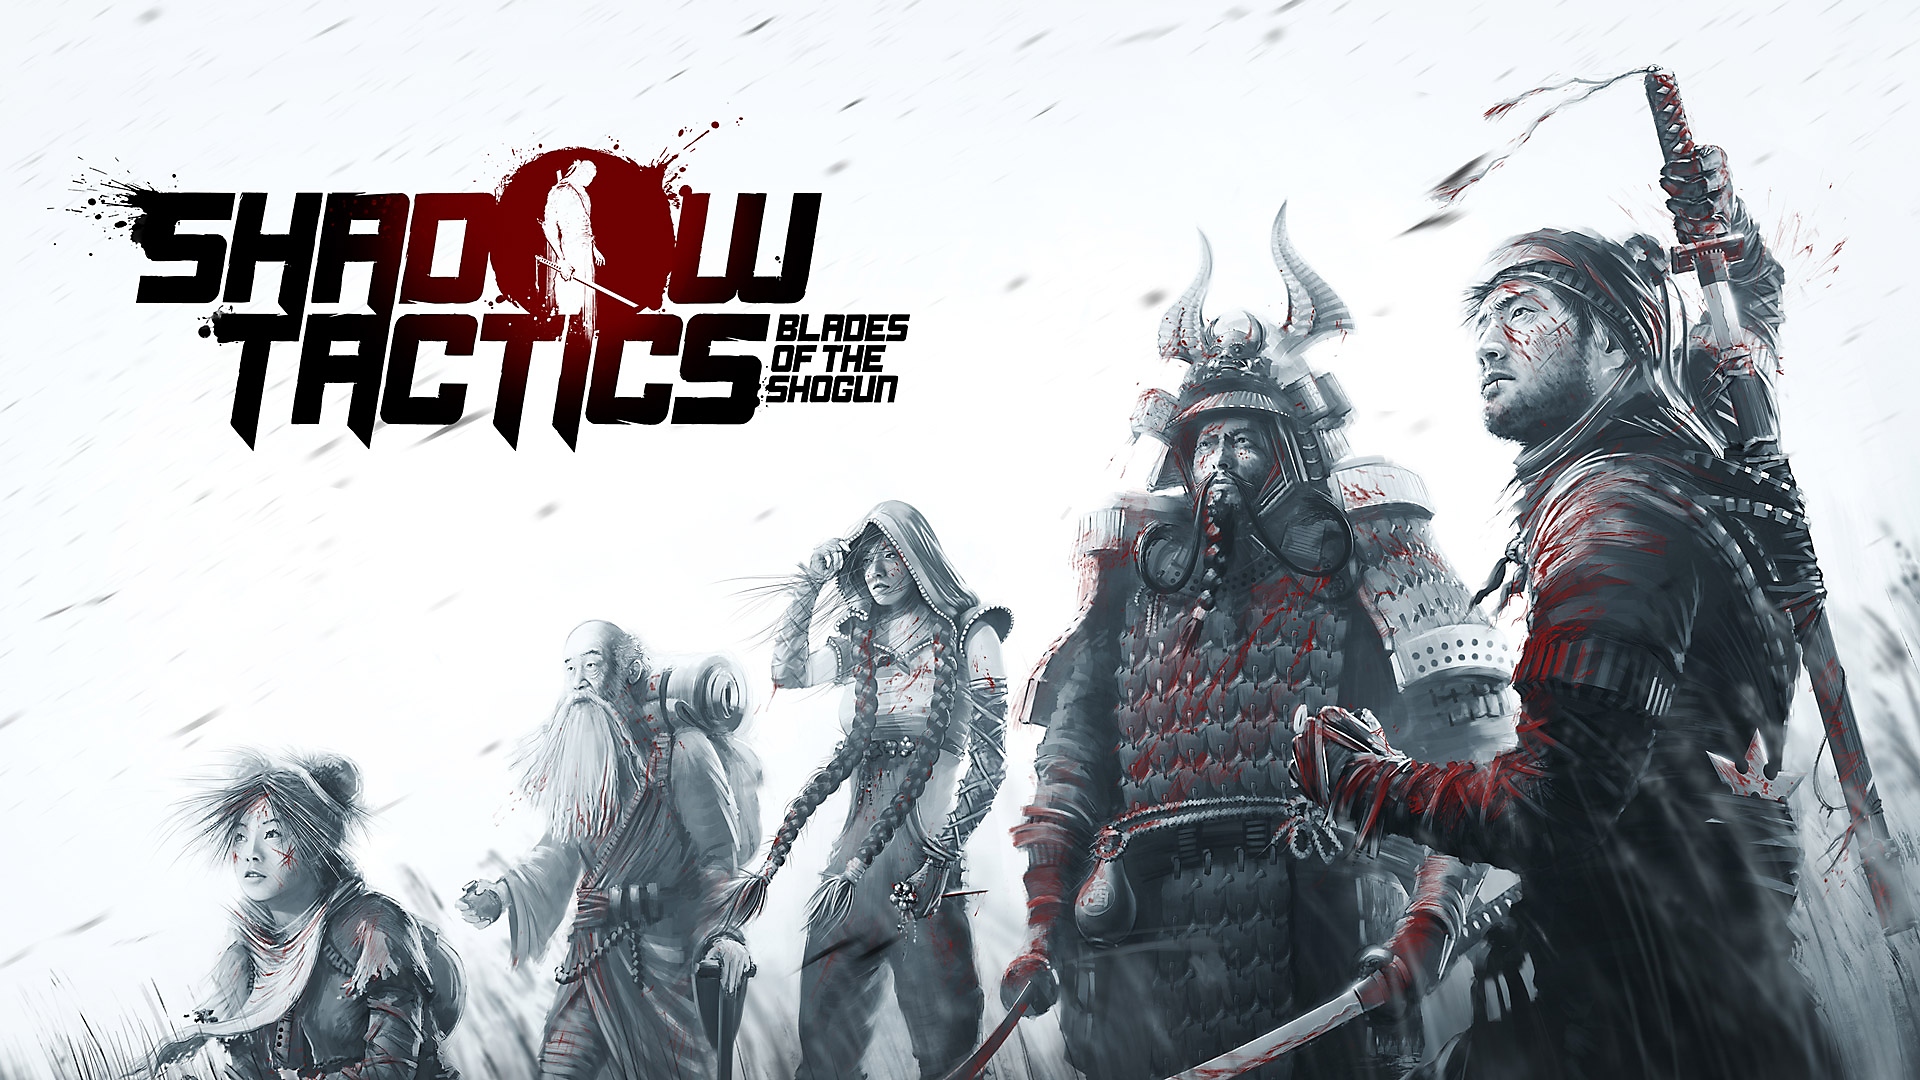 Shadow Tactics: Blades of the Shogun key art featuring the five main characters in black and white pencil sketch.